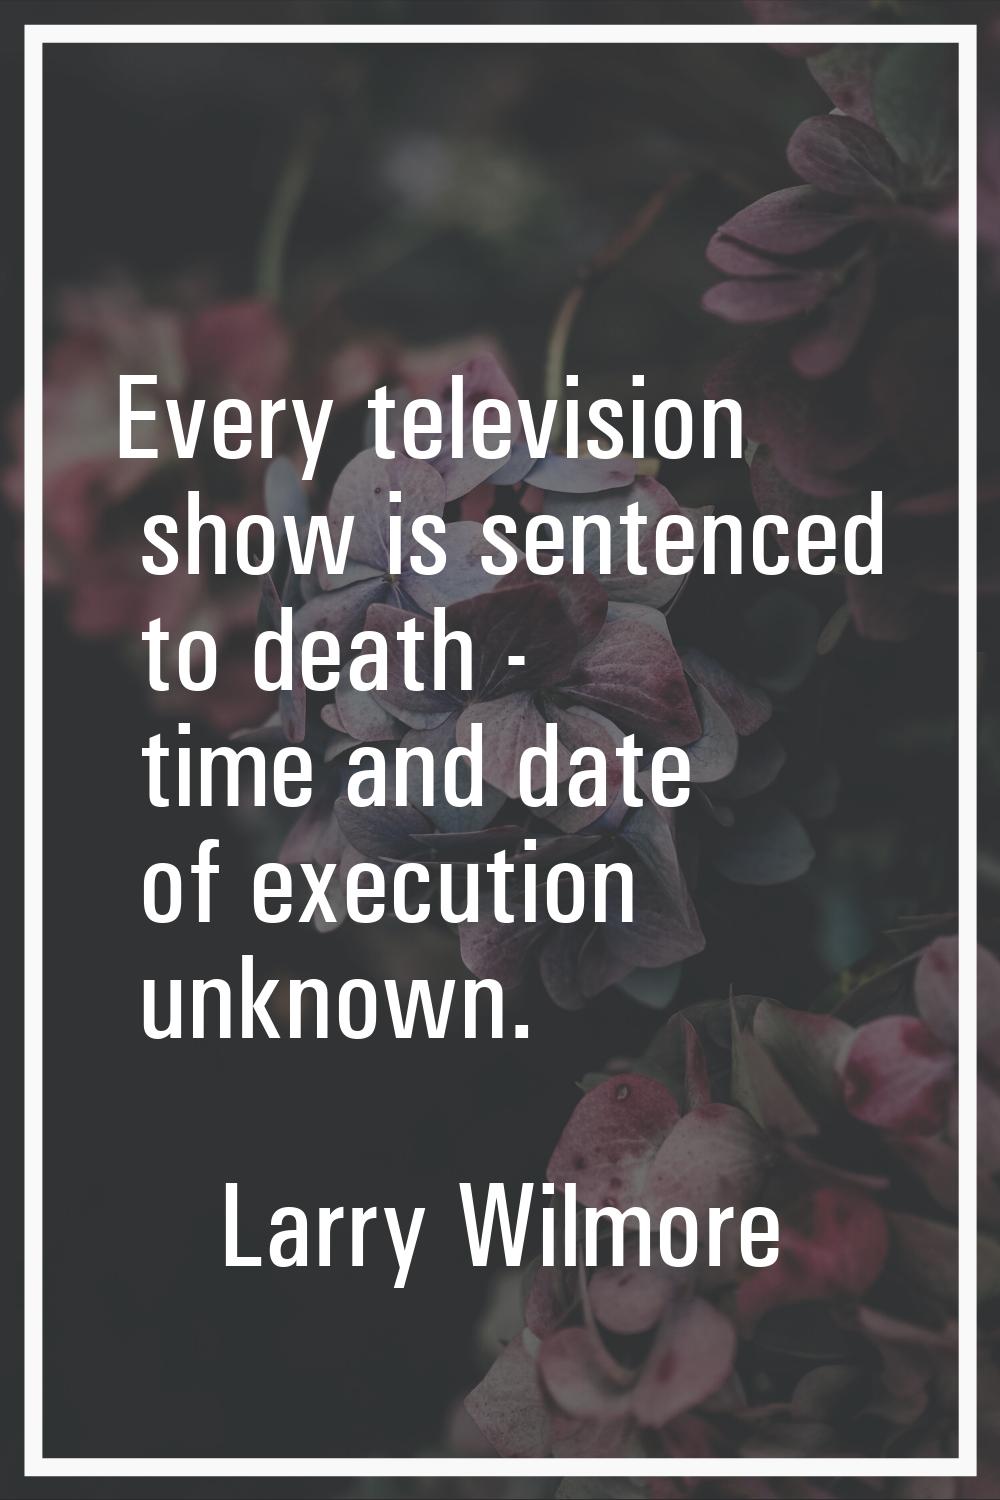 Every television show is sentenced to death - time and date of execution unknown.